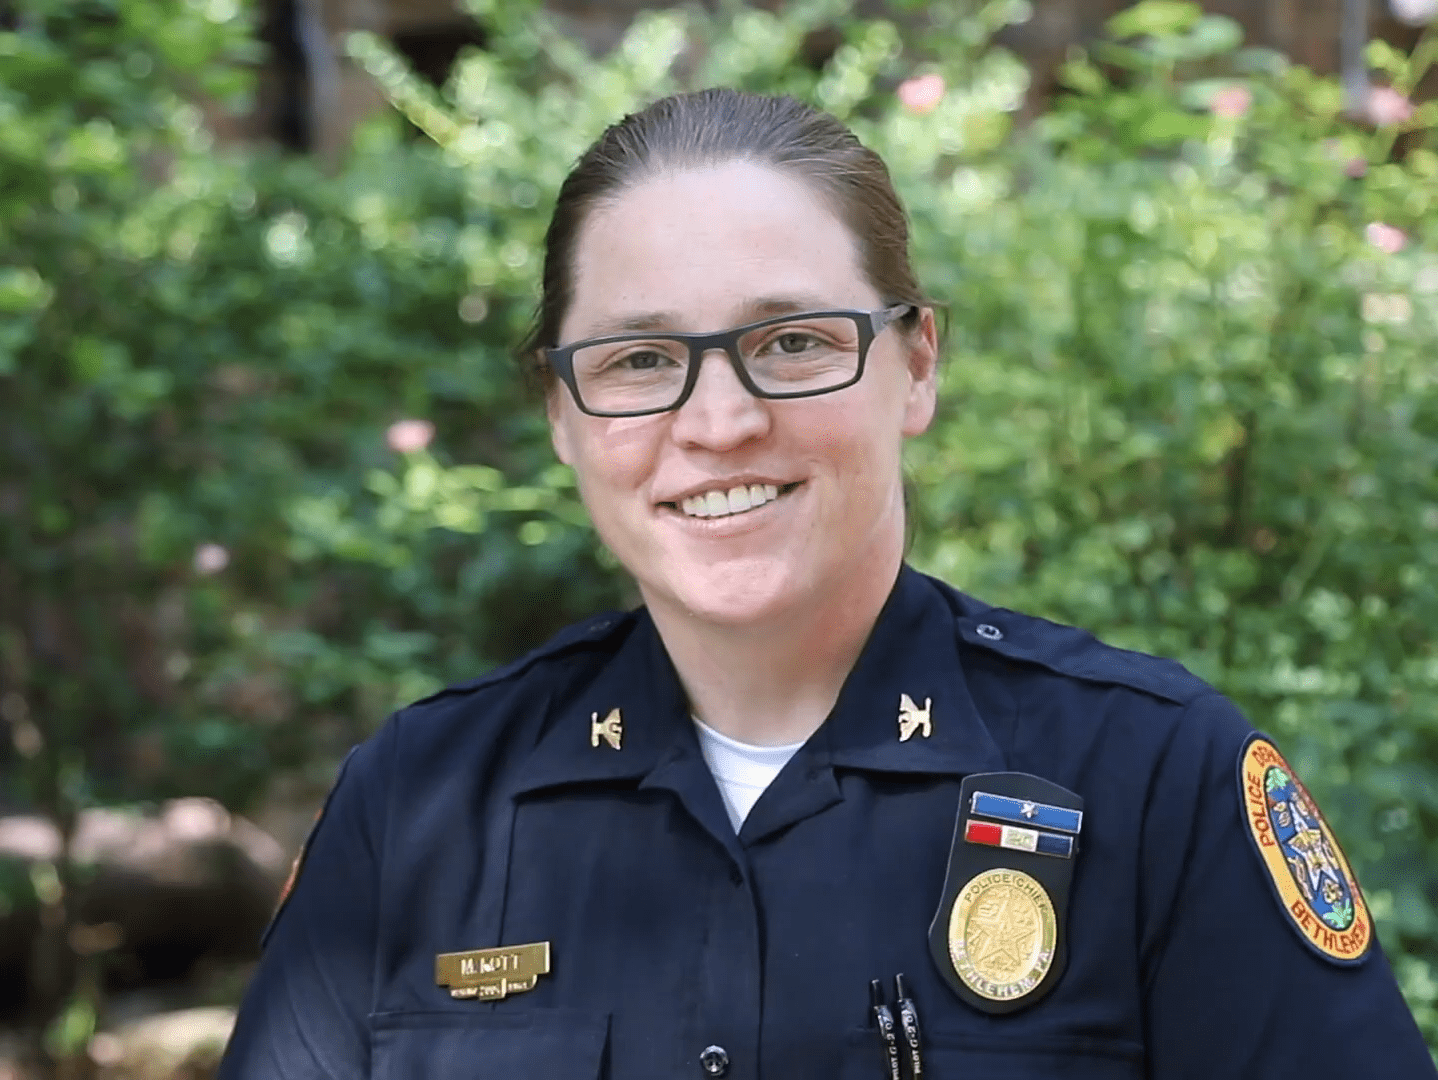 Chief Kott says: "My trauma has stayed with me, and it’s important that I’m out in the community letting others know that they are resilient and aren’t alone."